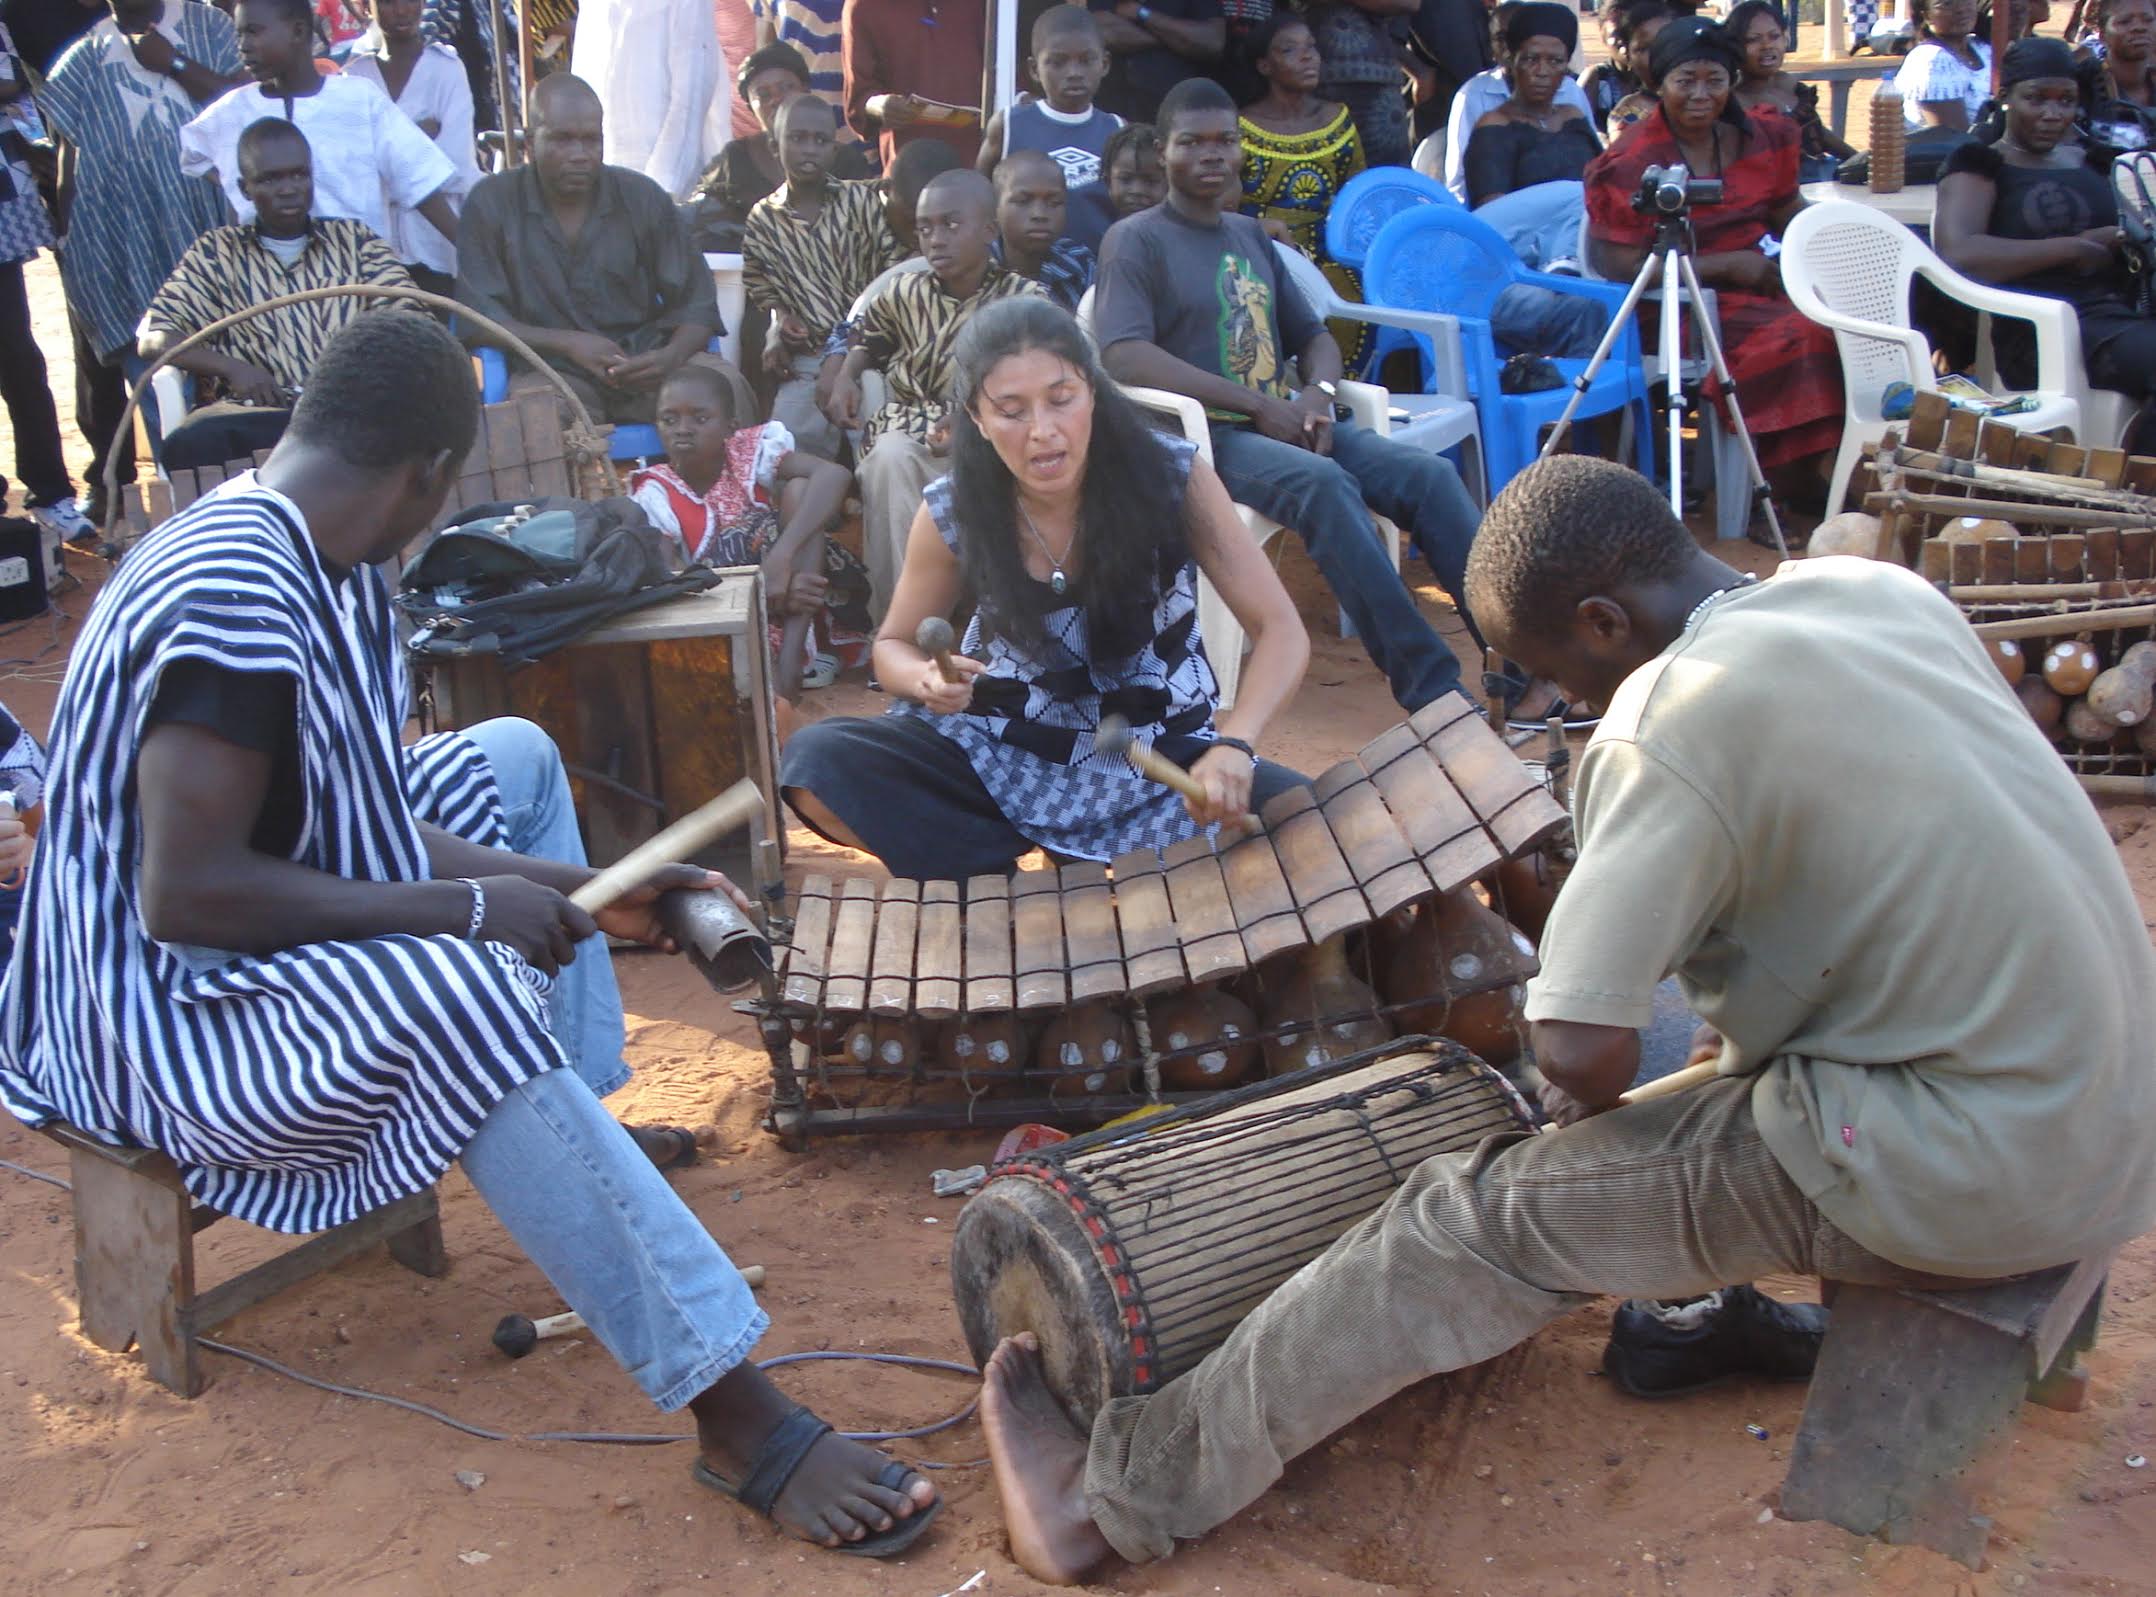 Percussionist Valerie Naranjo plays the West African gyil i